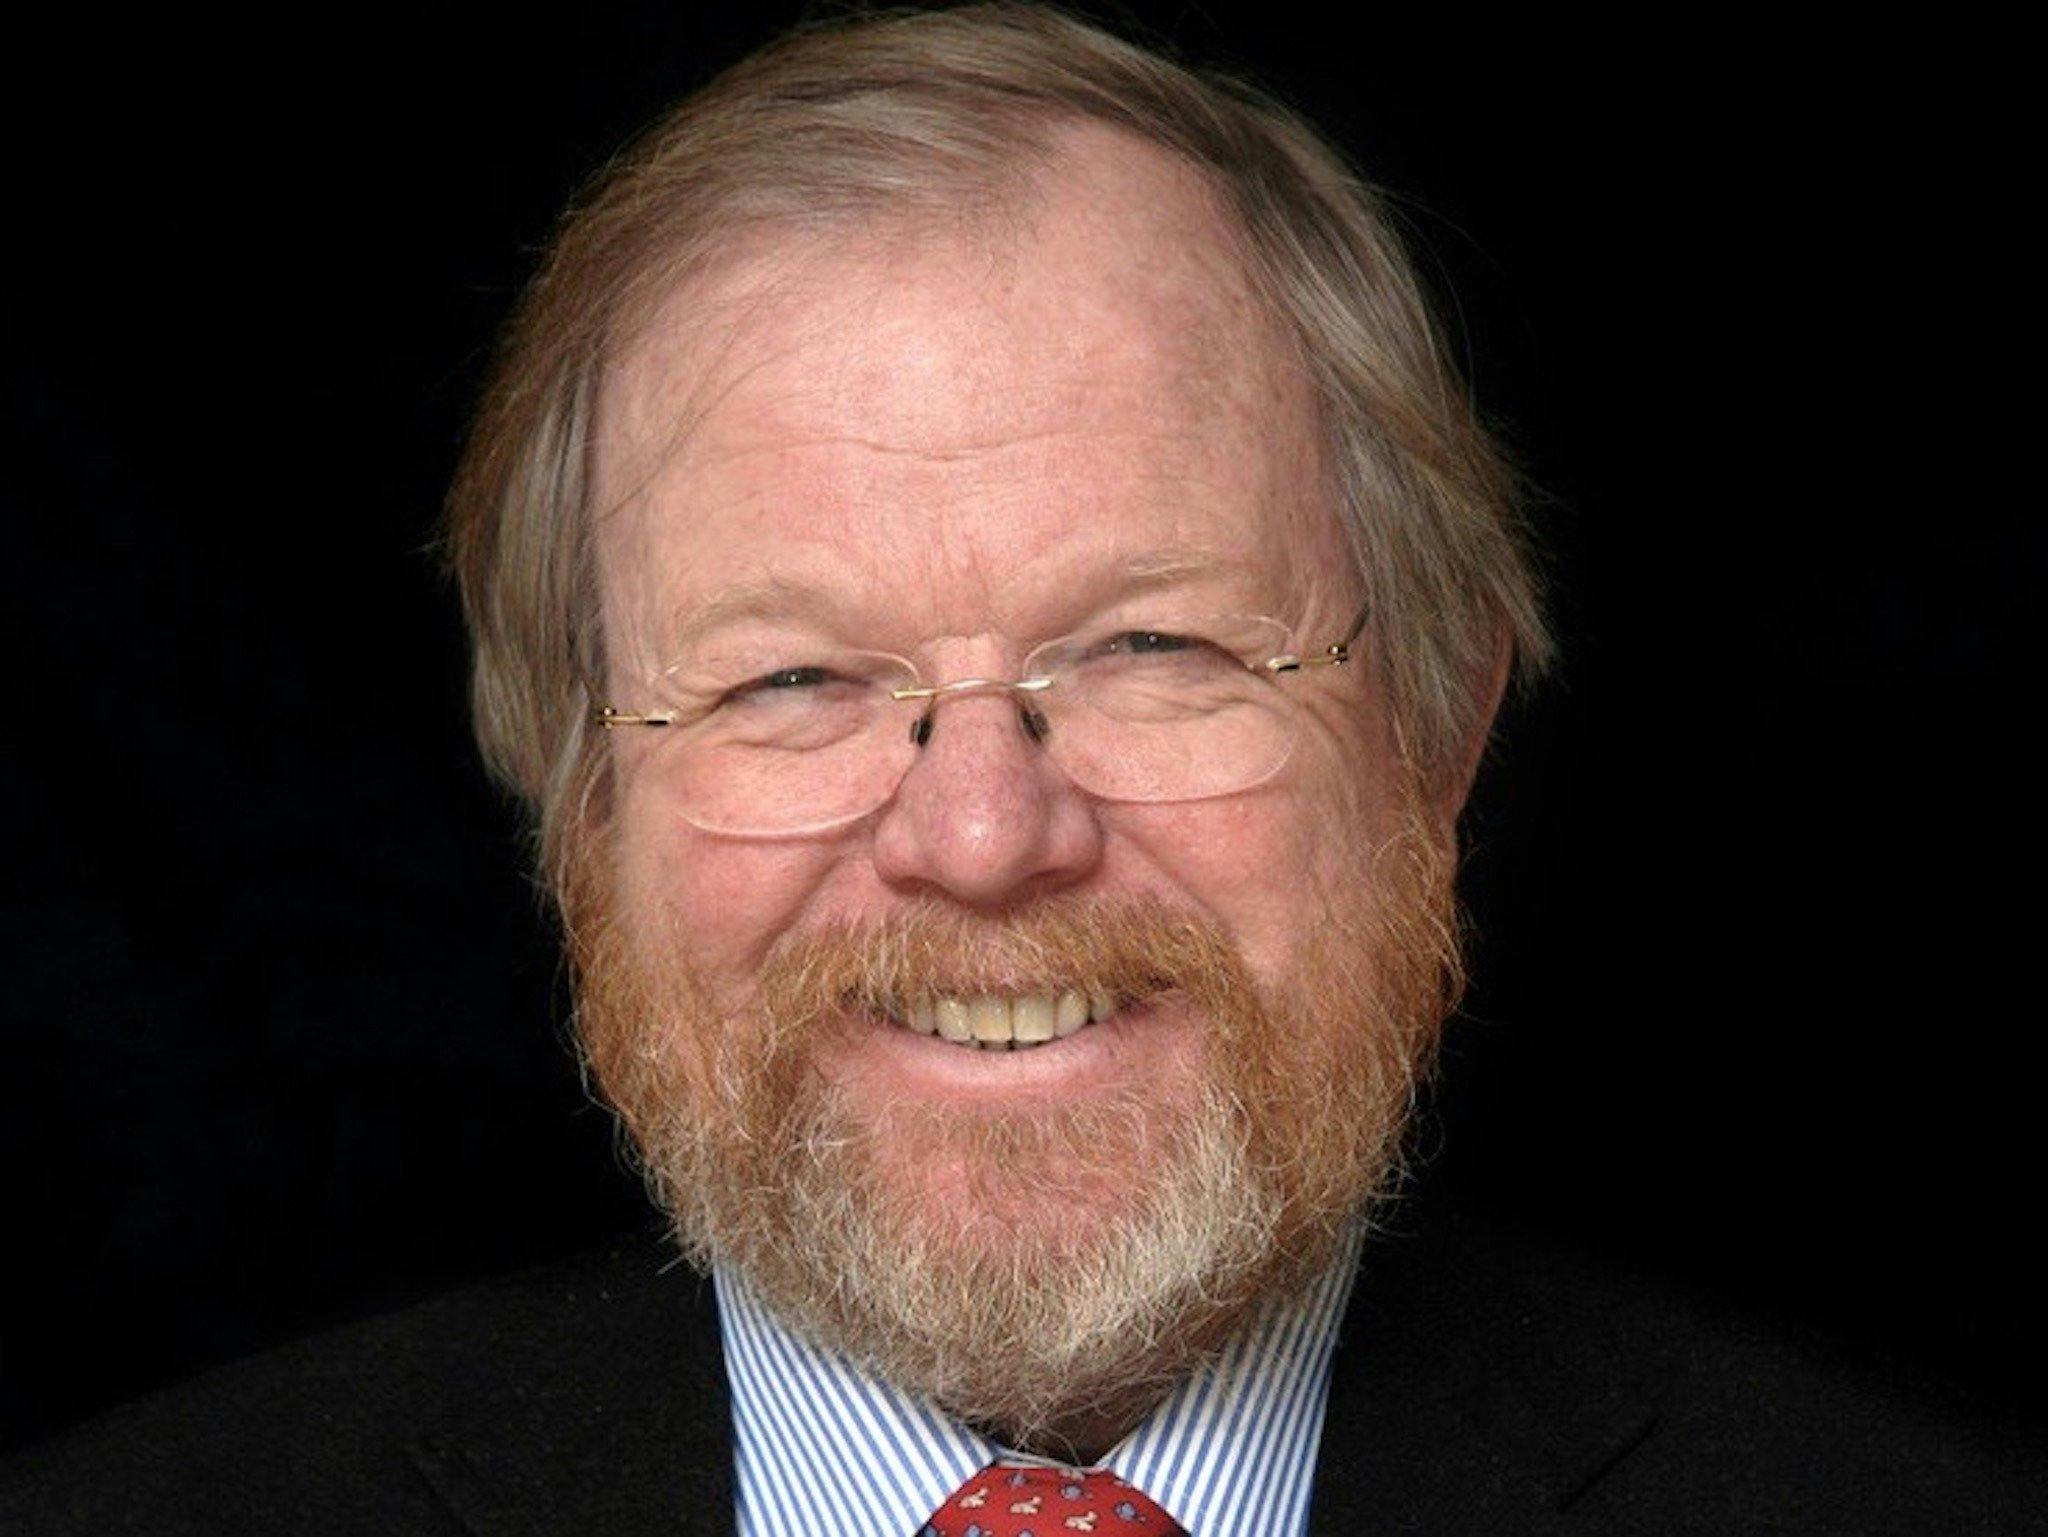 bill bryson the body review